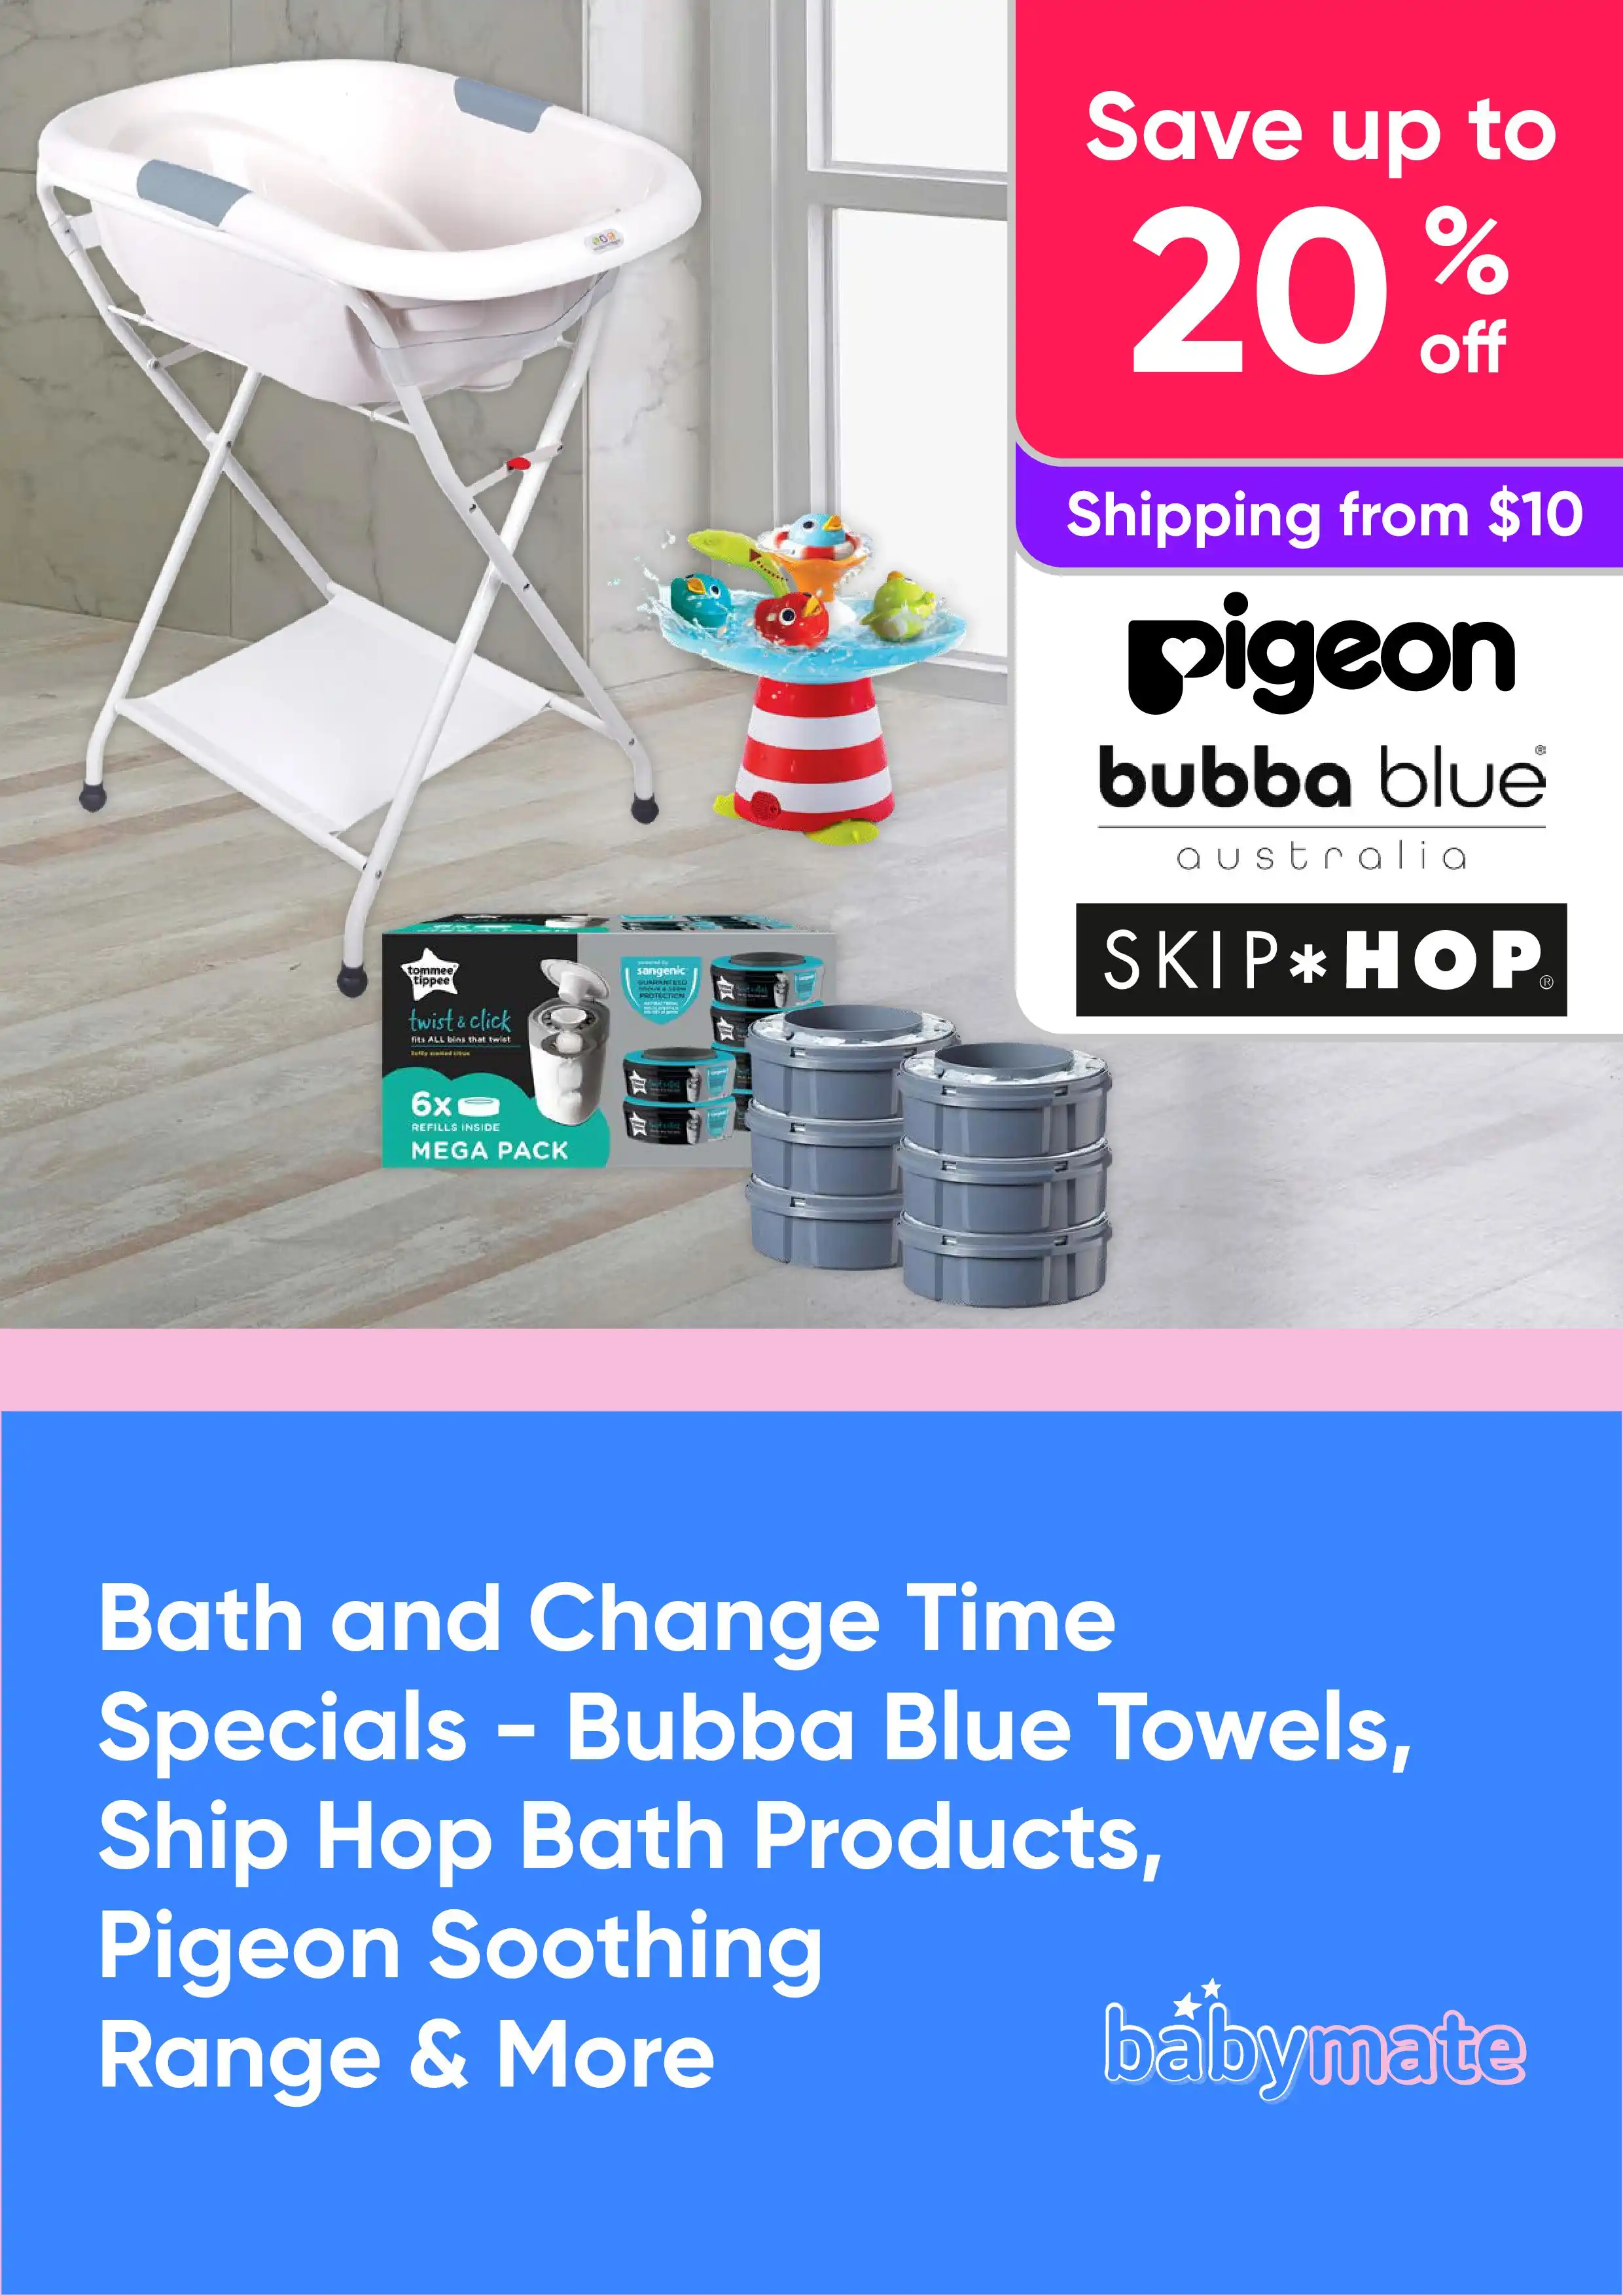 Bath and Change Time Specials - Save On Towels, Bath Products and More